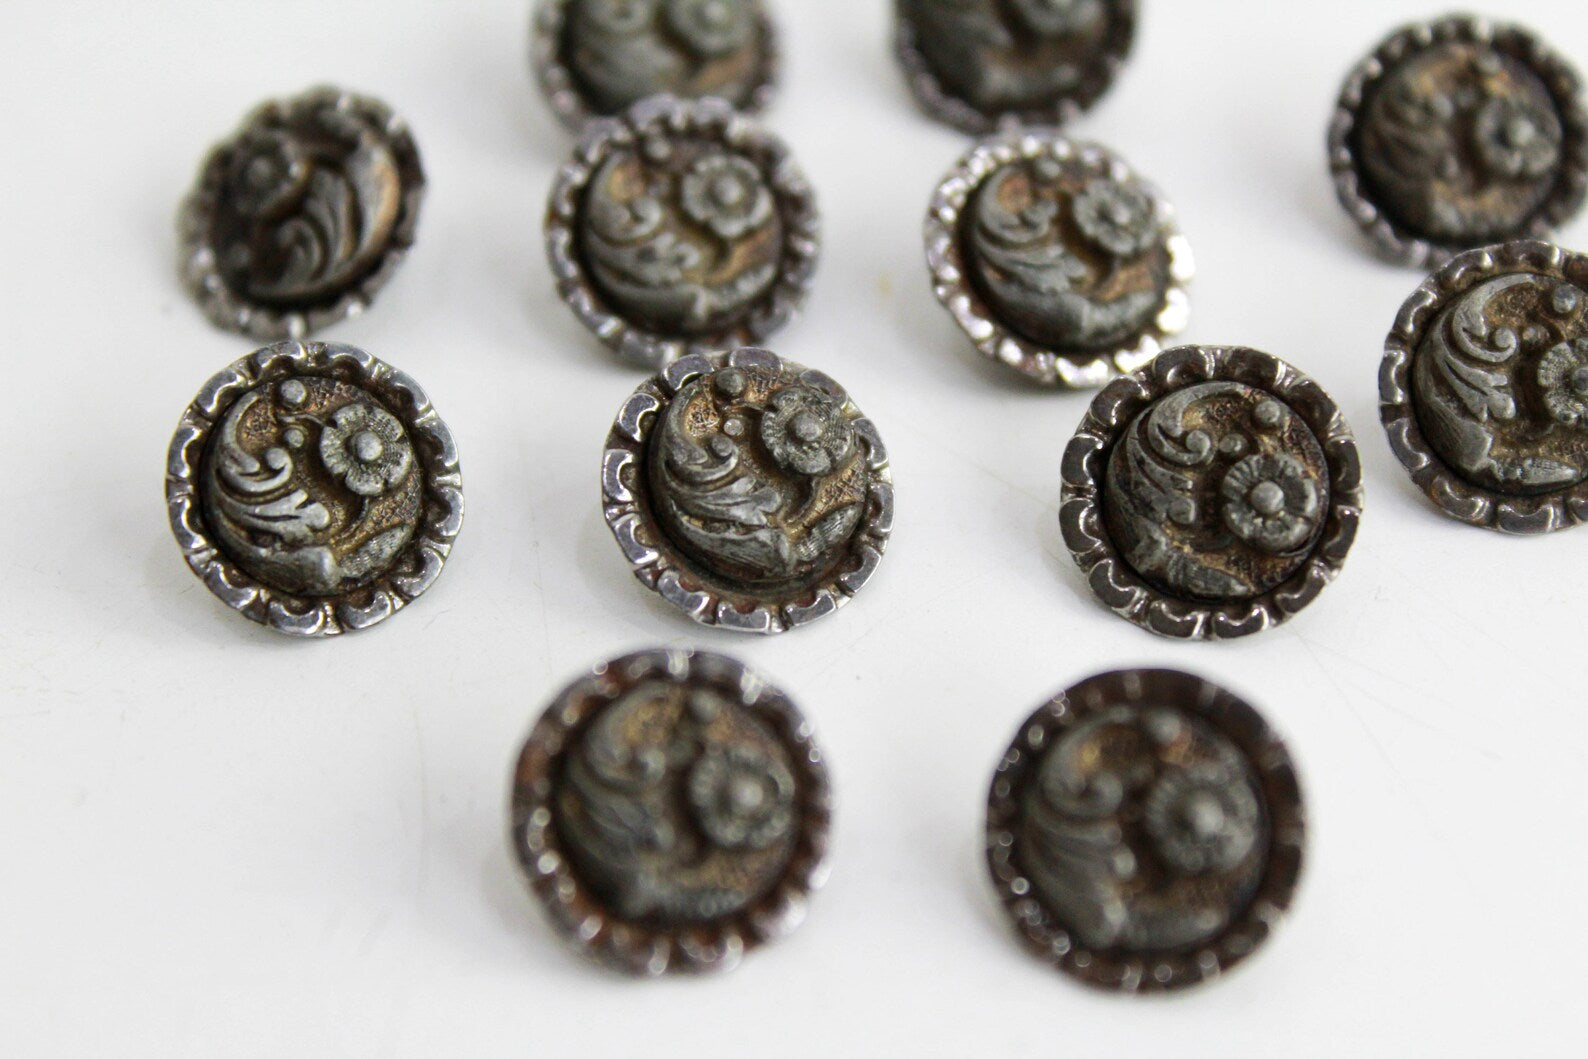 Victorian Flower Picture Buttons, 12 mm Set of 12, Steel/Metal Antique Dress Buttons Sewing Notions